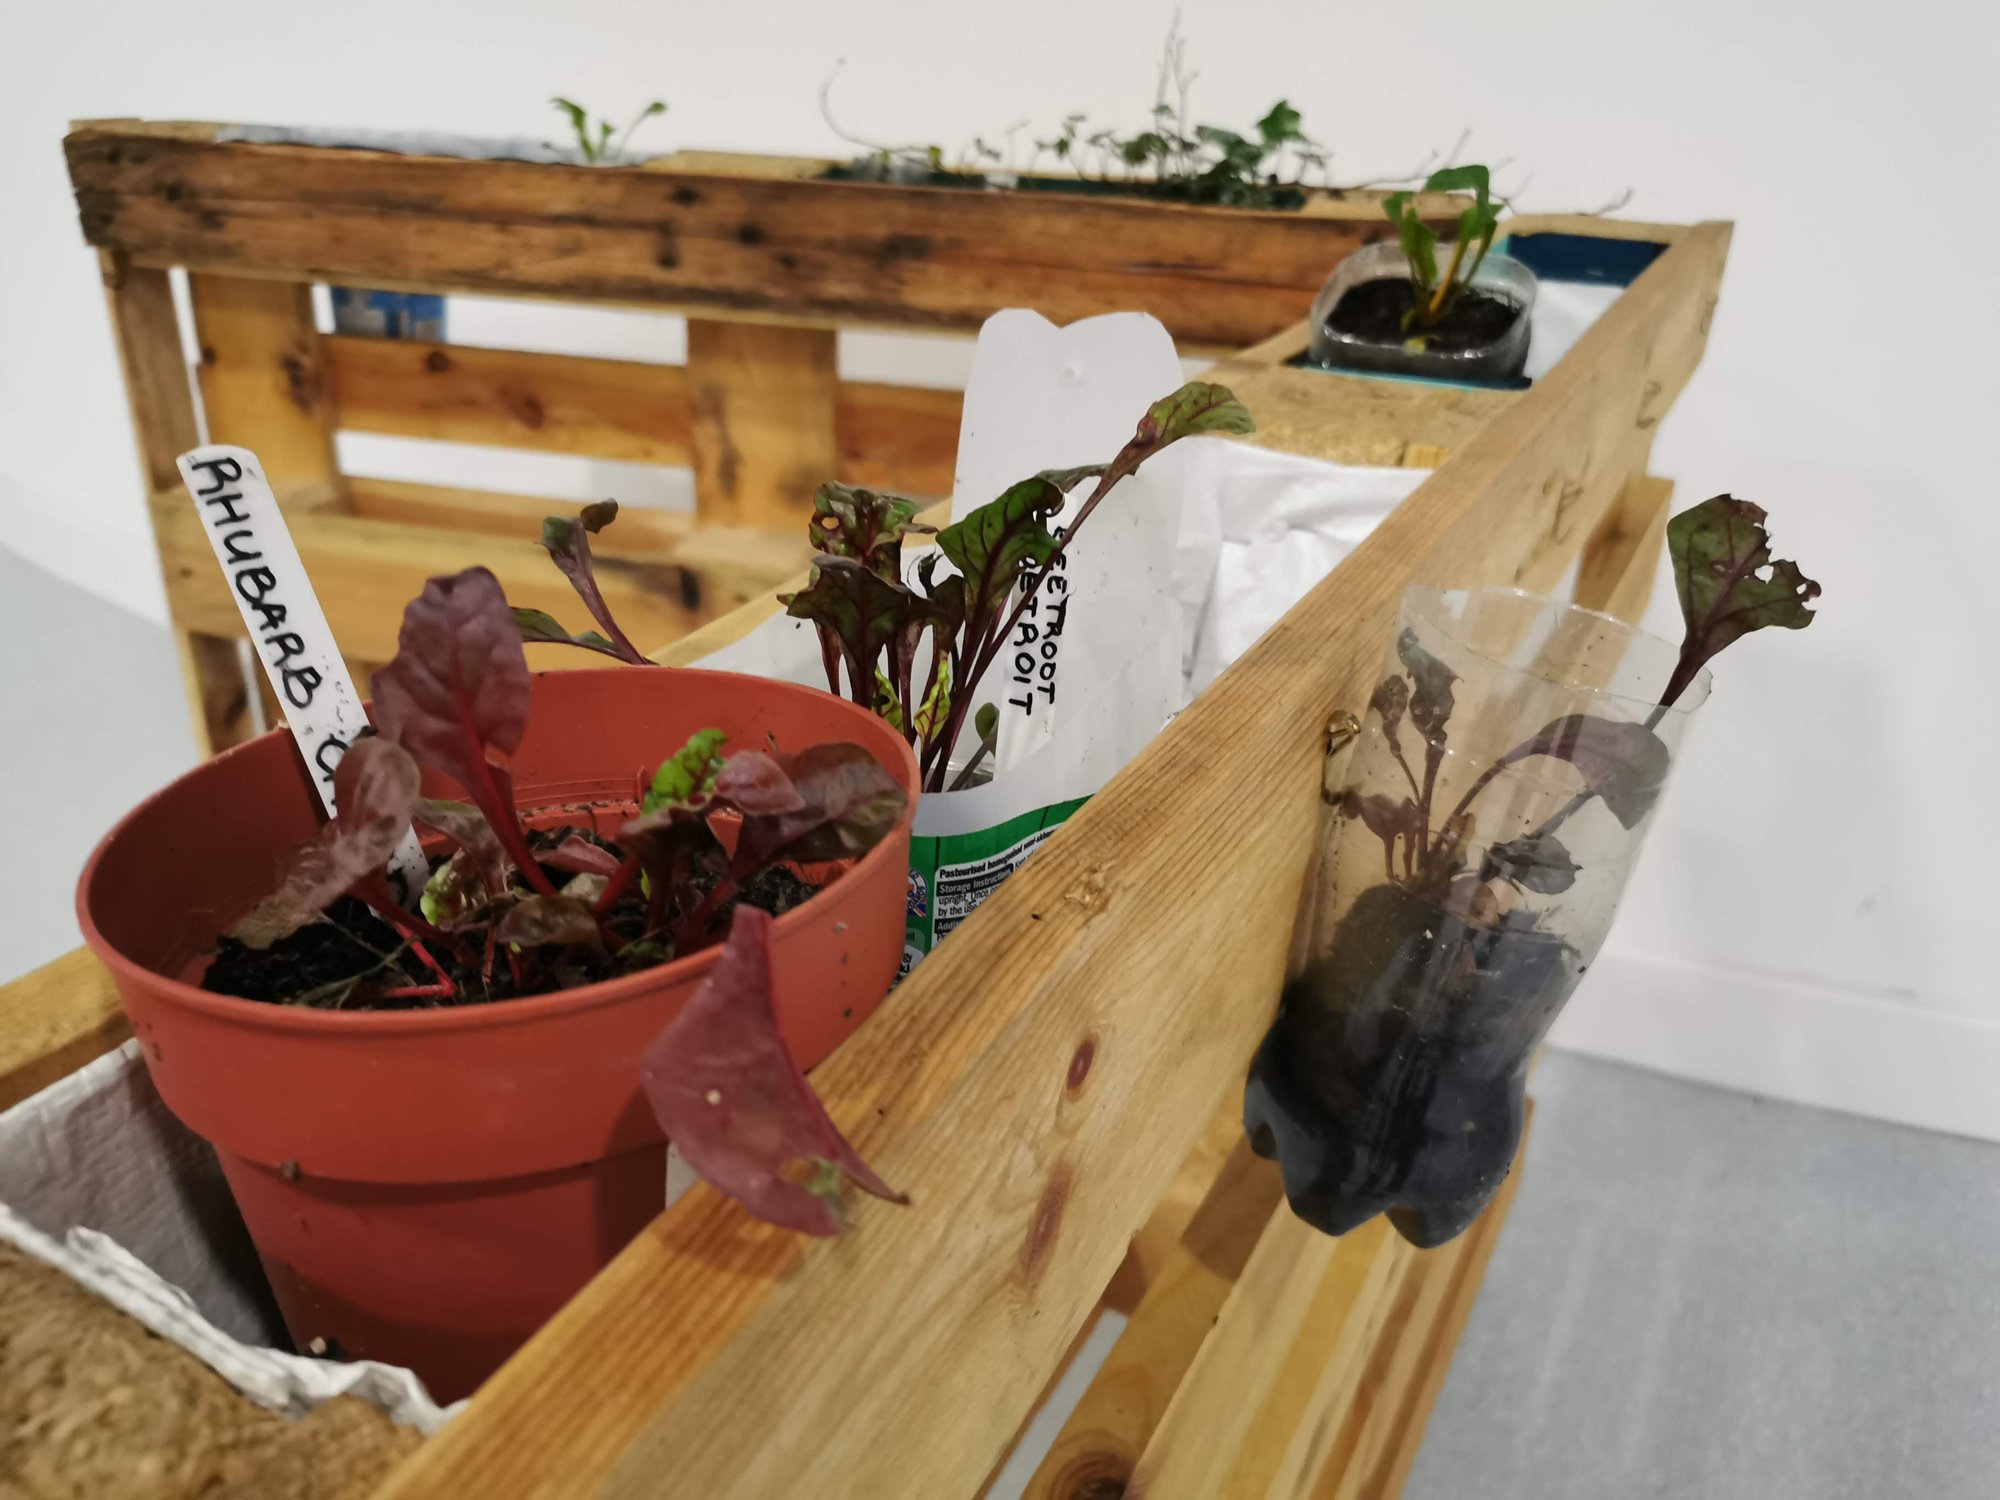 Image of a plant pots inside an upcycled wooden pallet, with containers made from reusable shopping bags, milk cartons and plastic bottles.